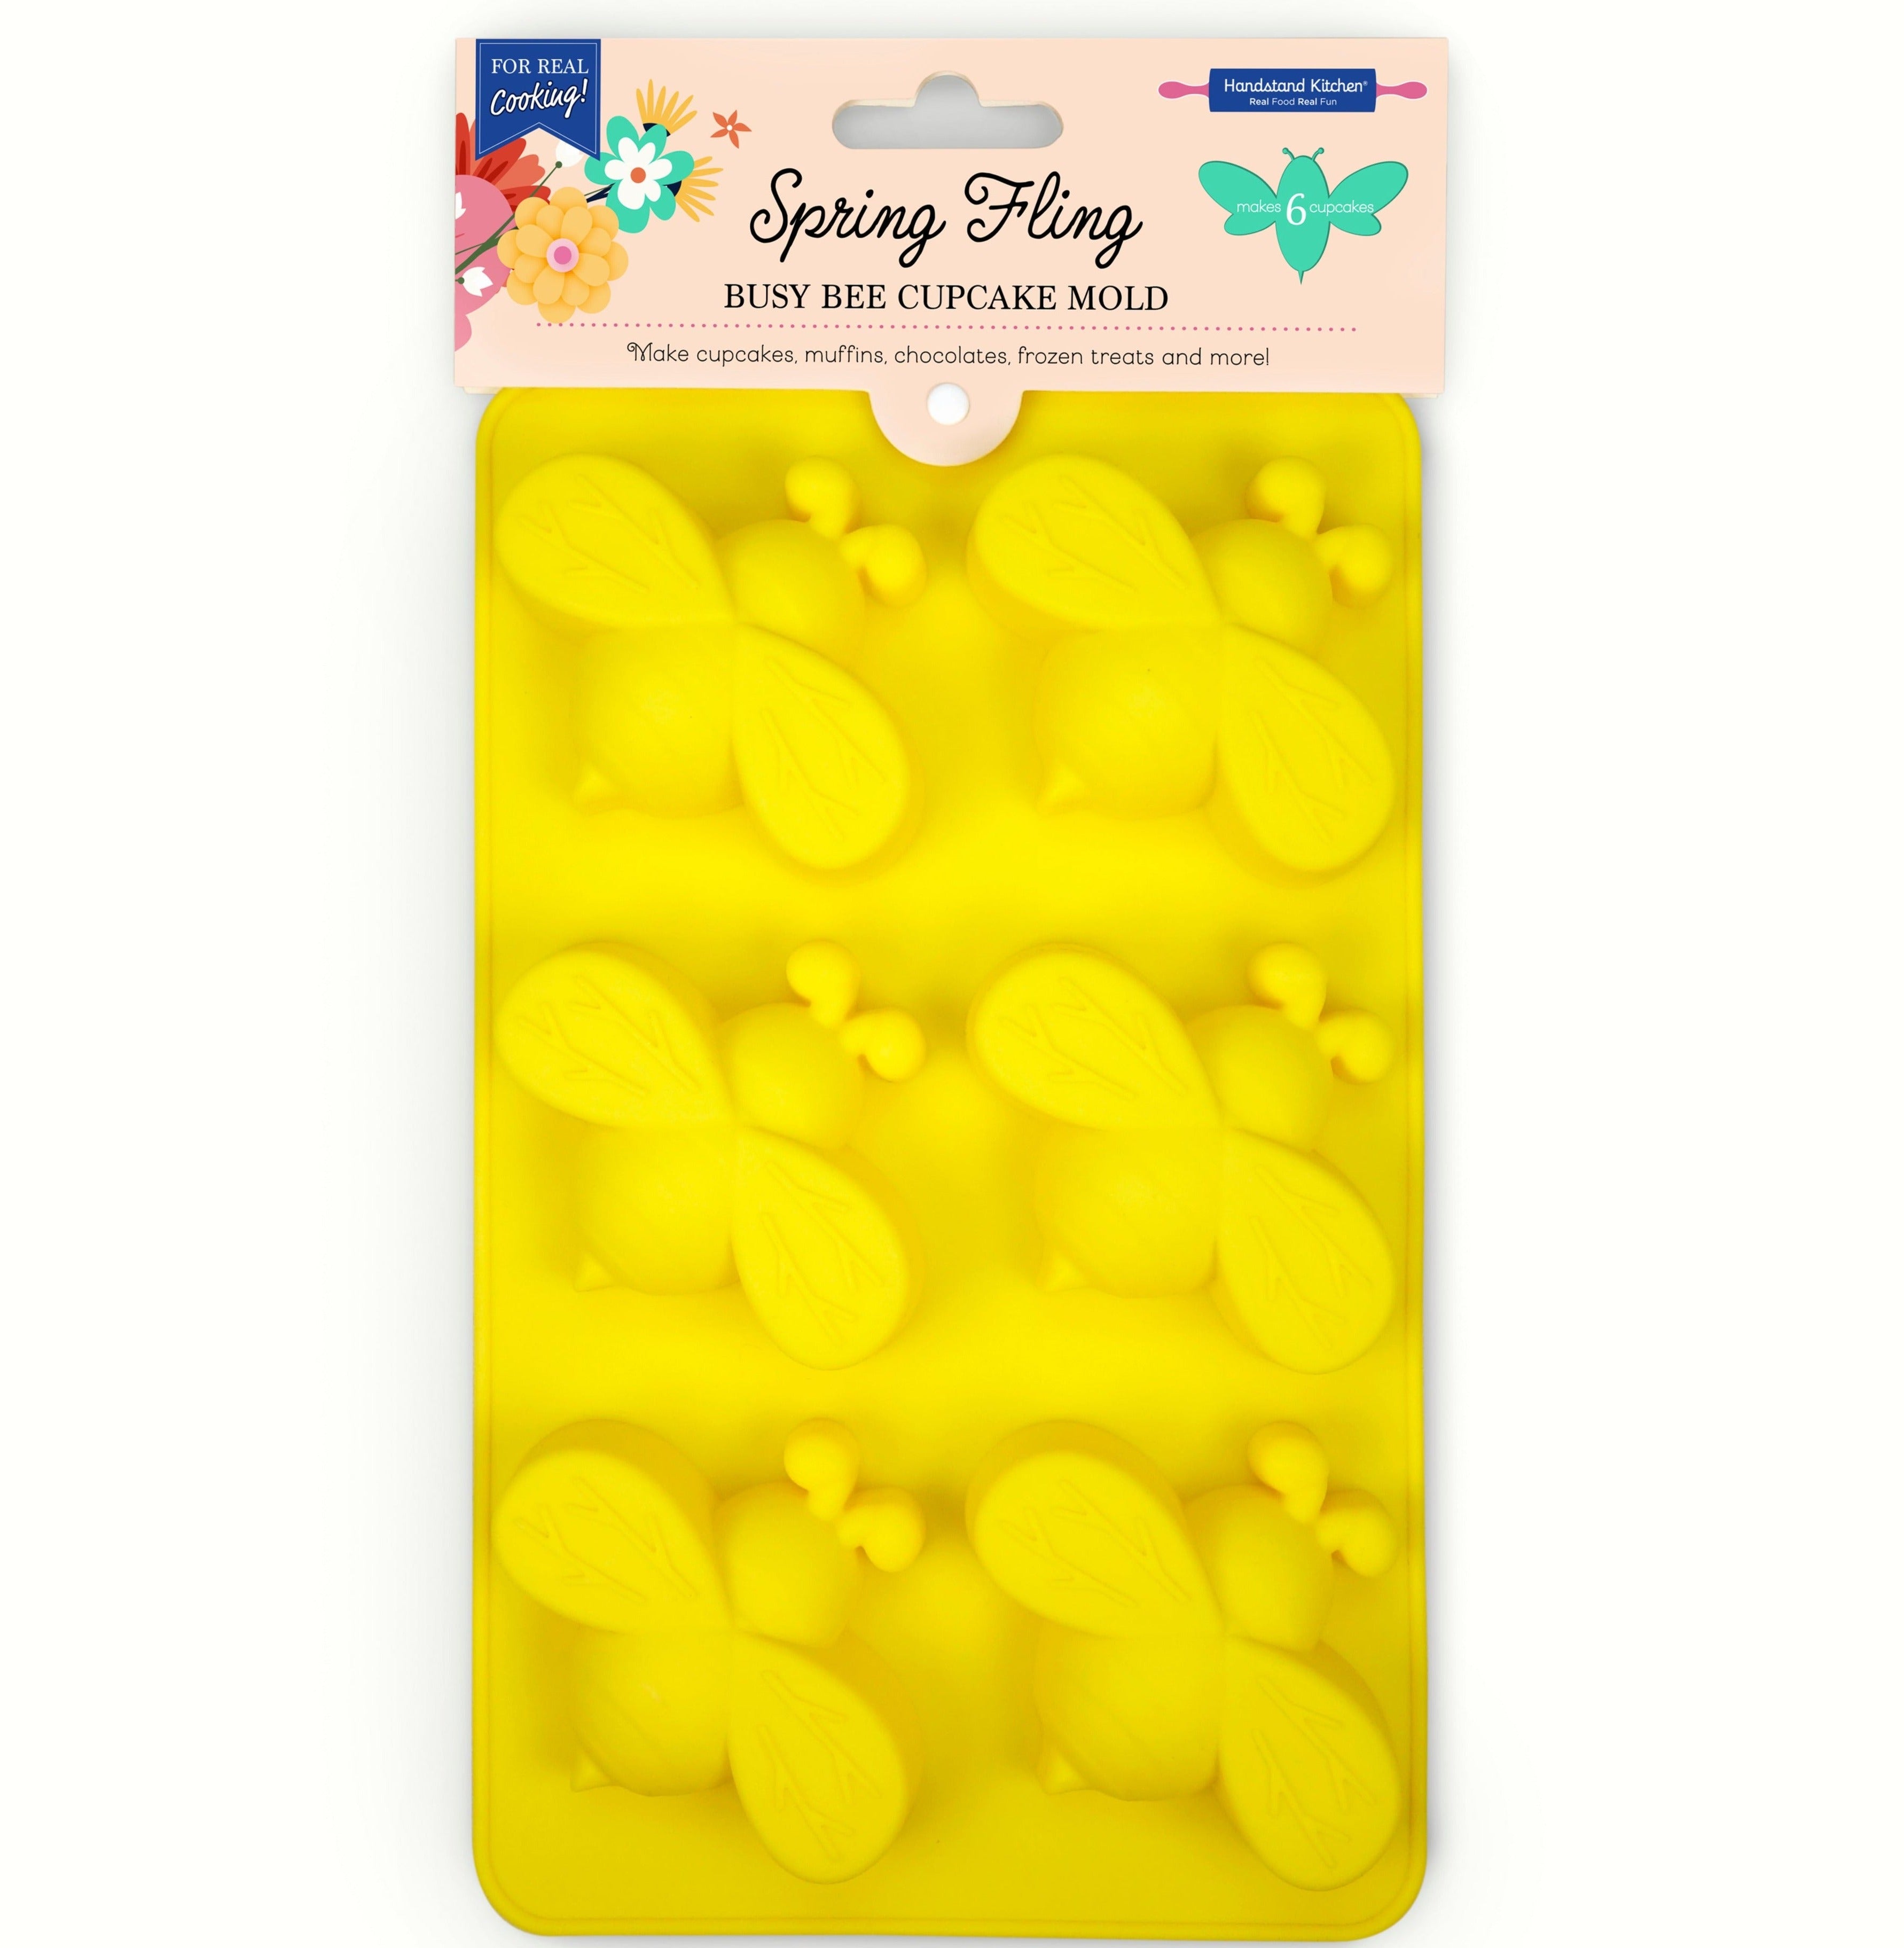 Image of Spring Fling Busy Bee Cupcake Mold